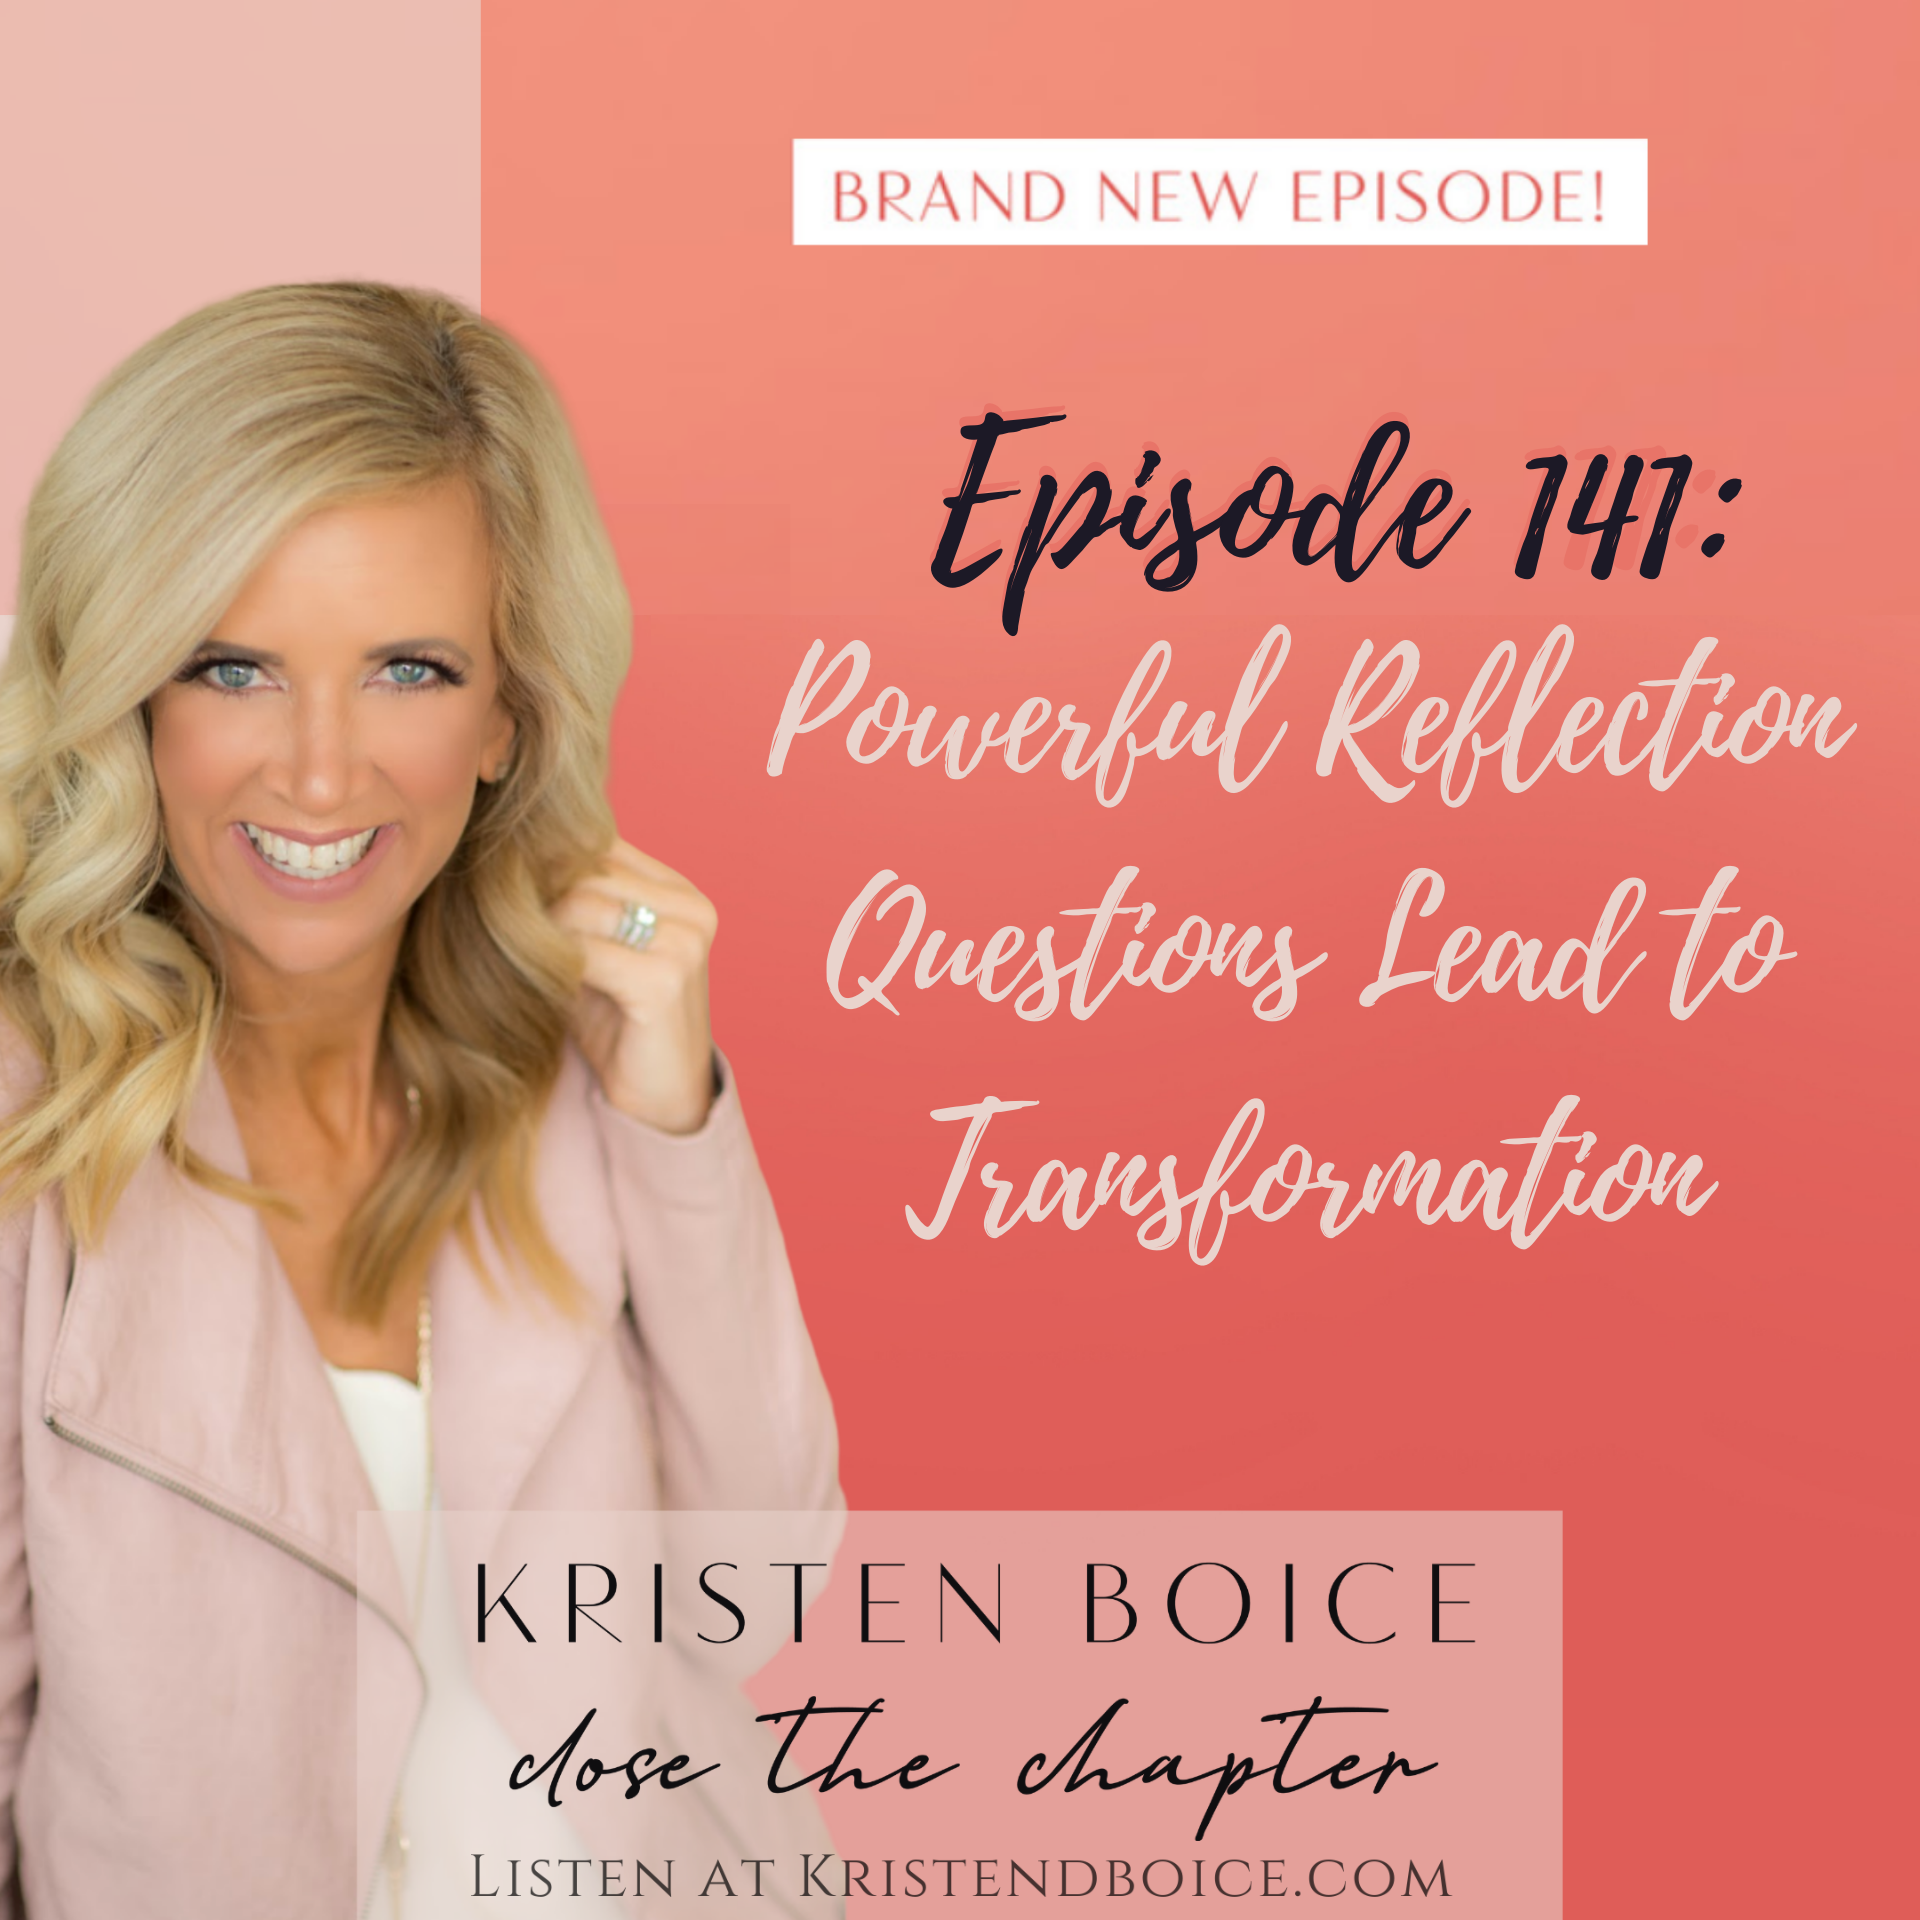 Episode 141 Powerful Reflection Questions Lead to Transformation